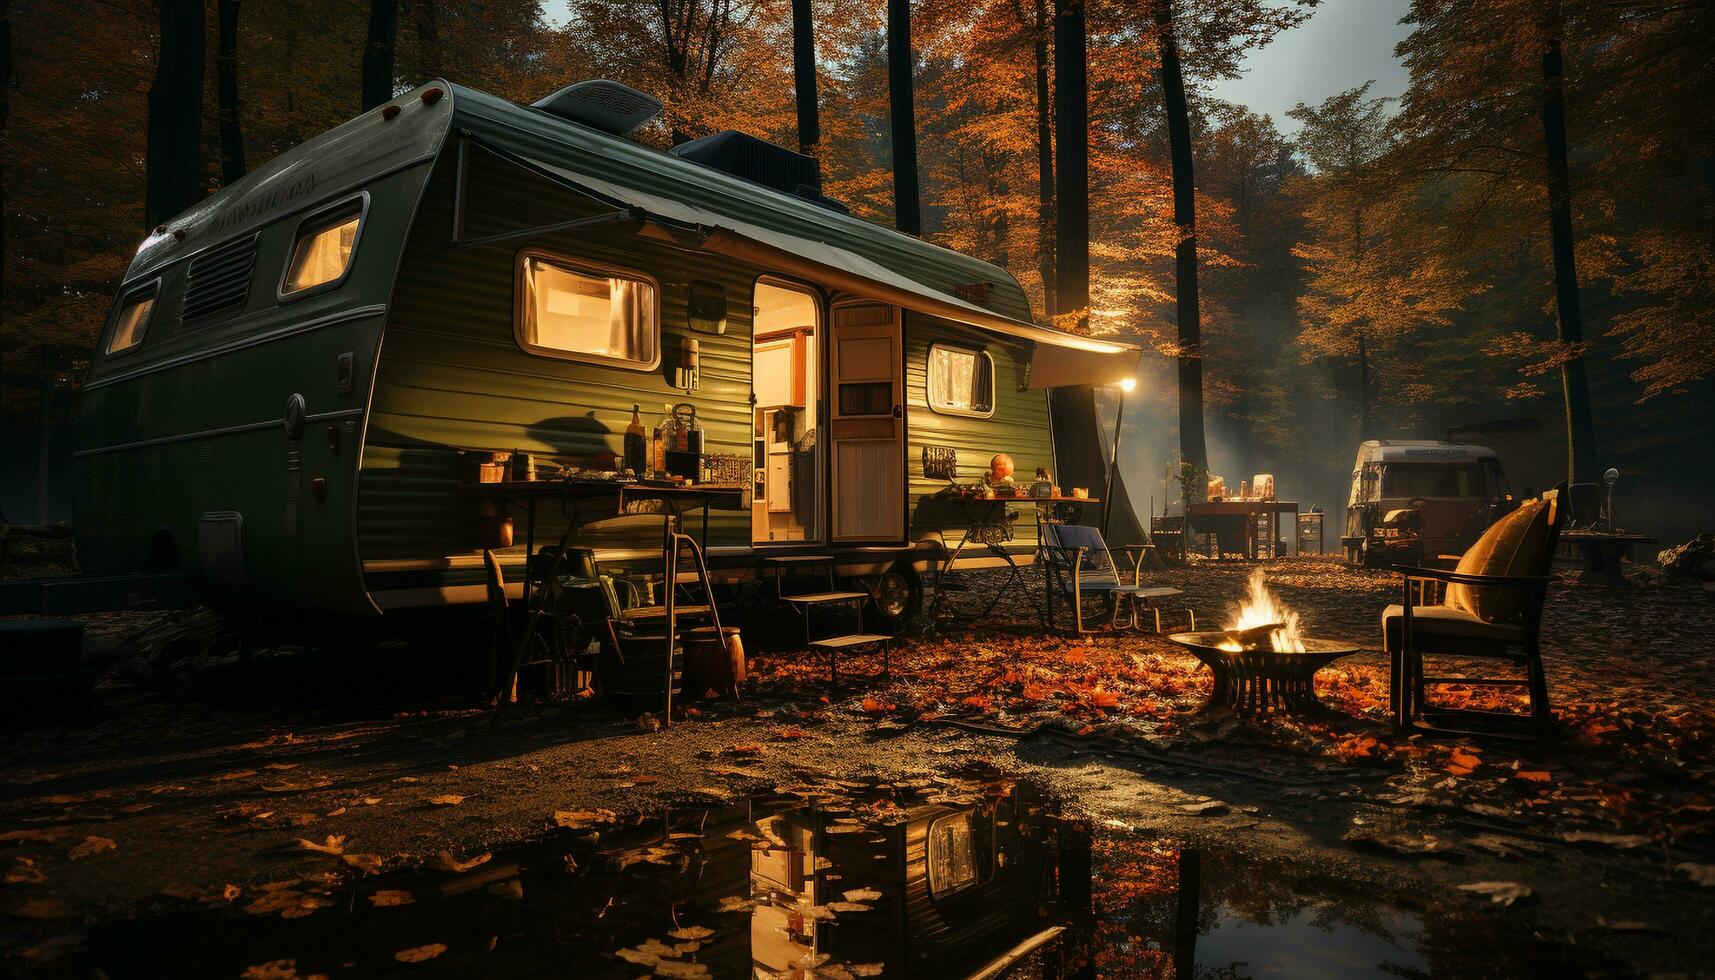 Camping in autumn, nature beauty, a tranquil scene by the fire generated by AI photo